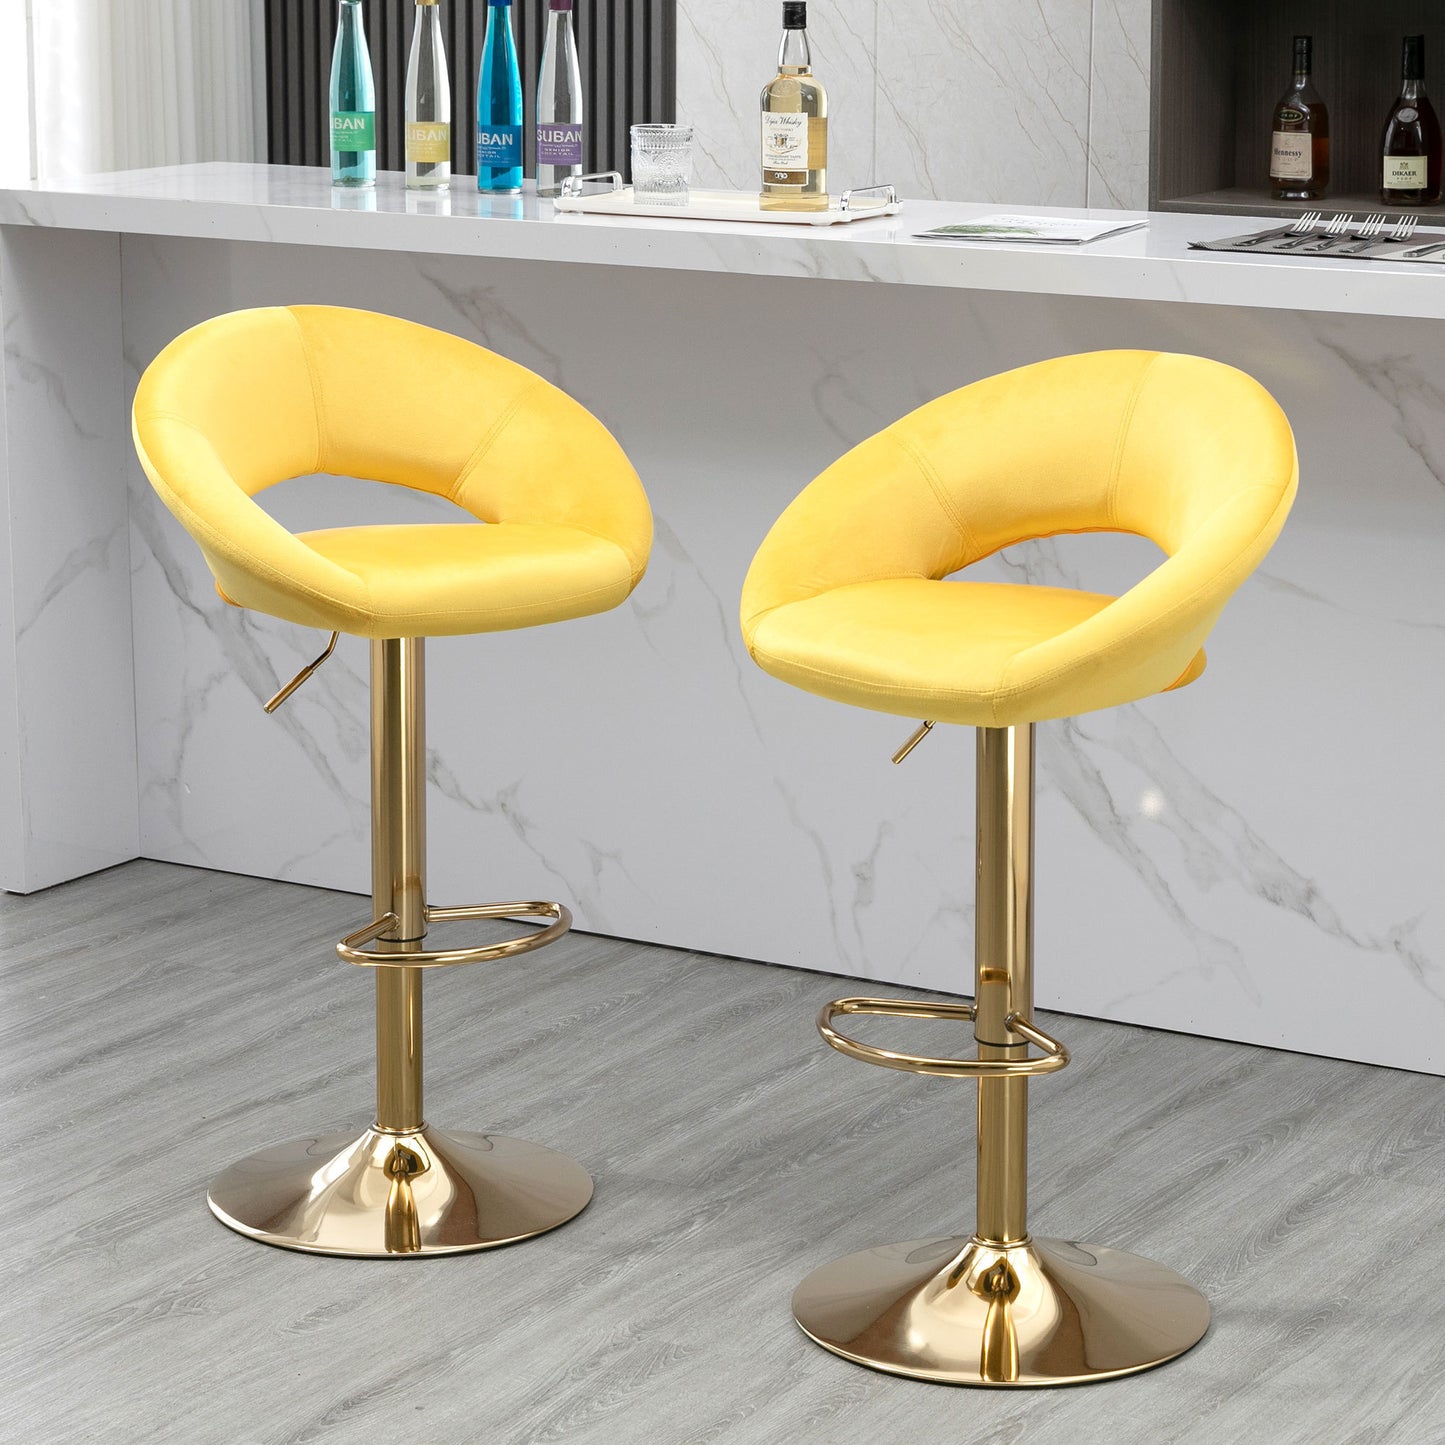 Yellow Velvet Adjustable Modern Dining Chairs,Counter Height Bar Chair,Swivel Bar Stools Set of 2 - Enova Luxe Home Store